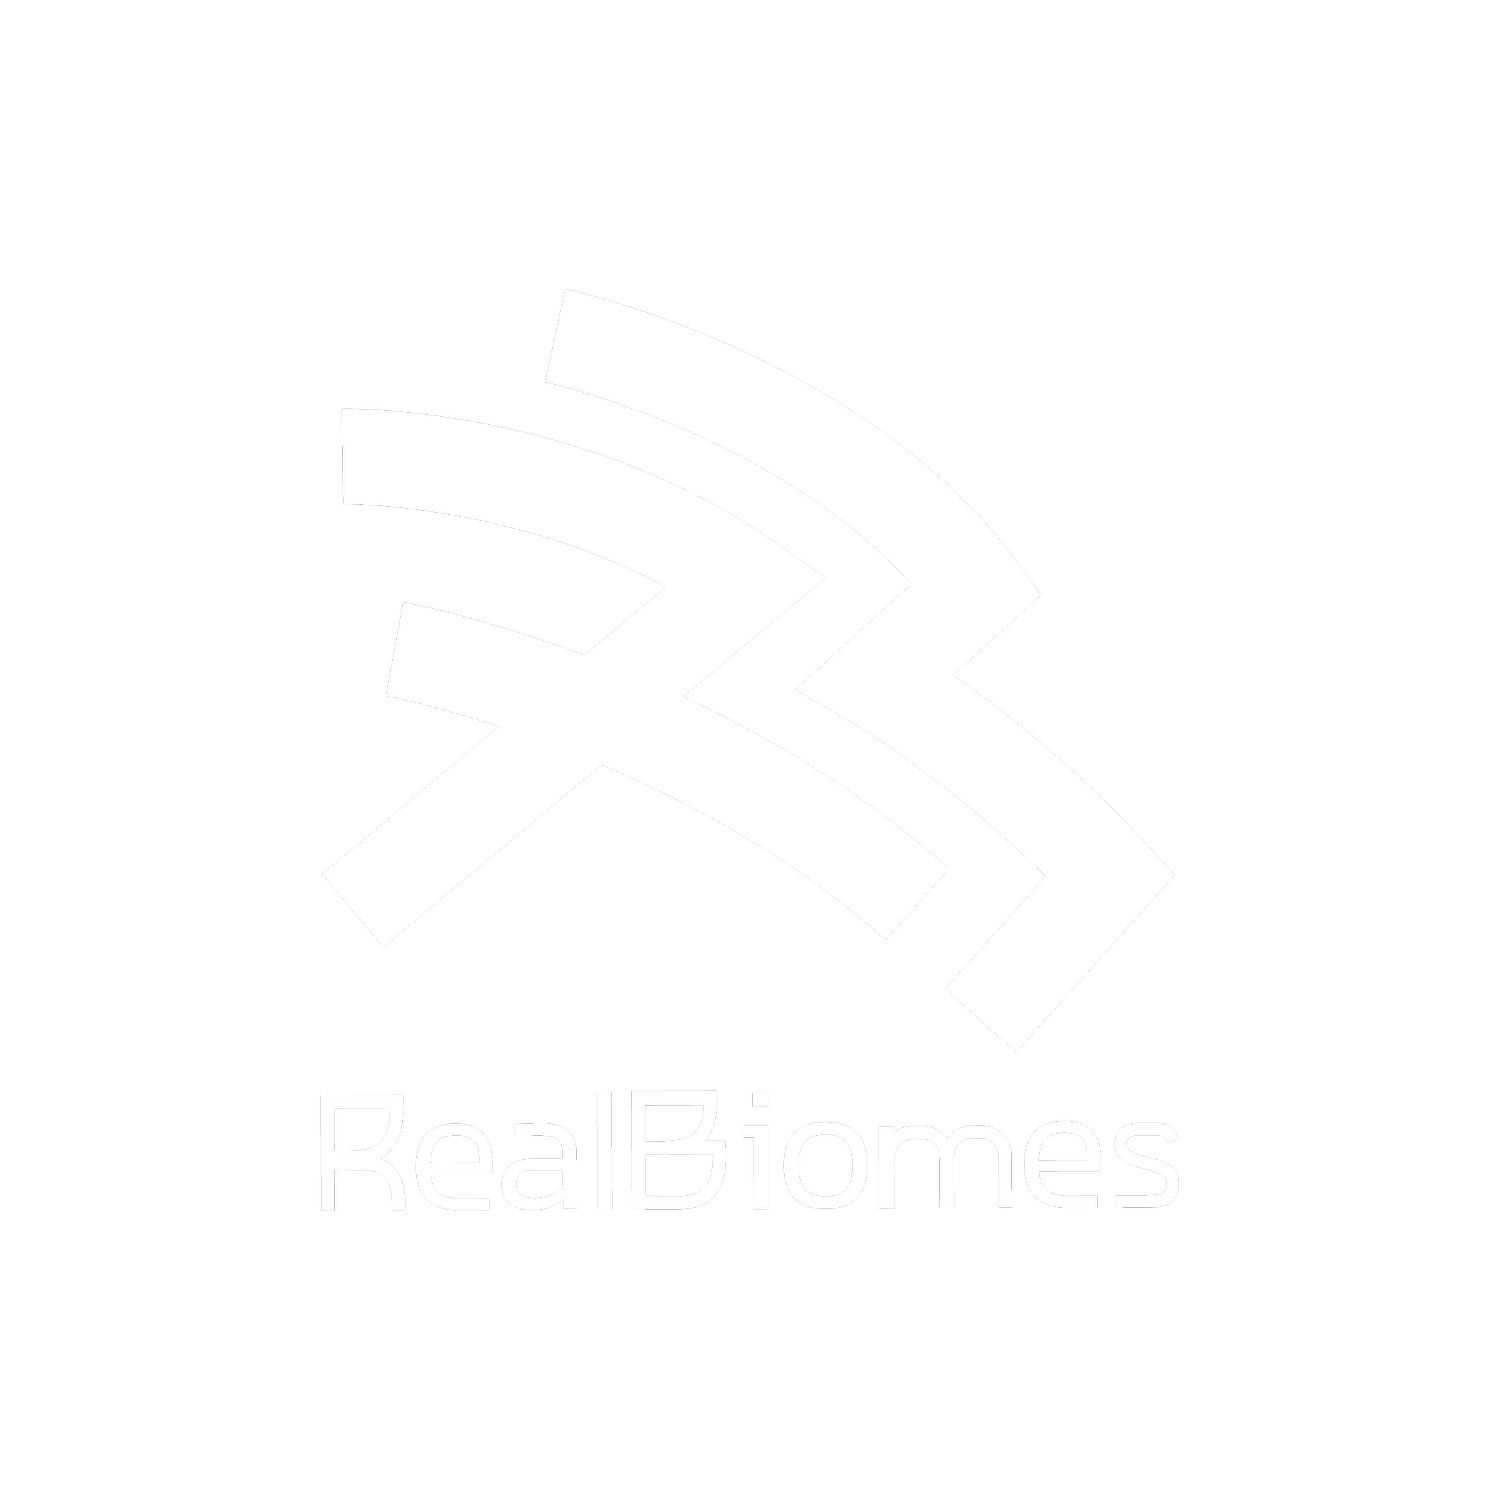 RealBiomes | Complete Ready-To-Use 3D Forest and Desert Biomes/Assets for Games, Movies/TV and more.